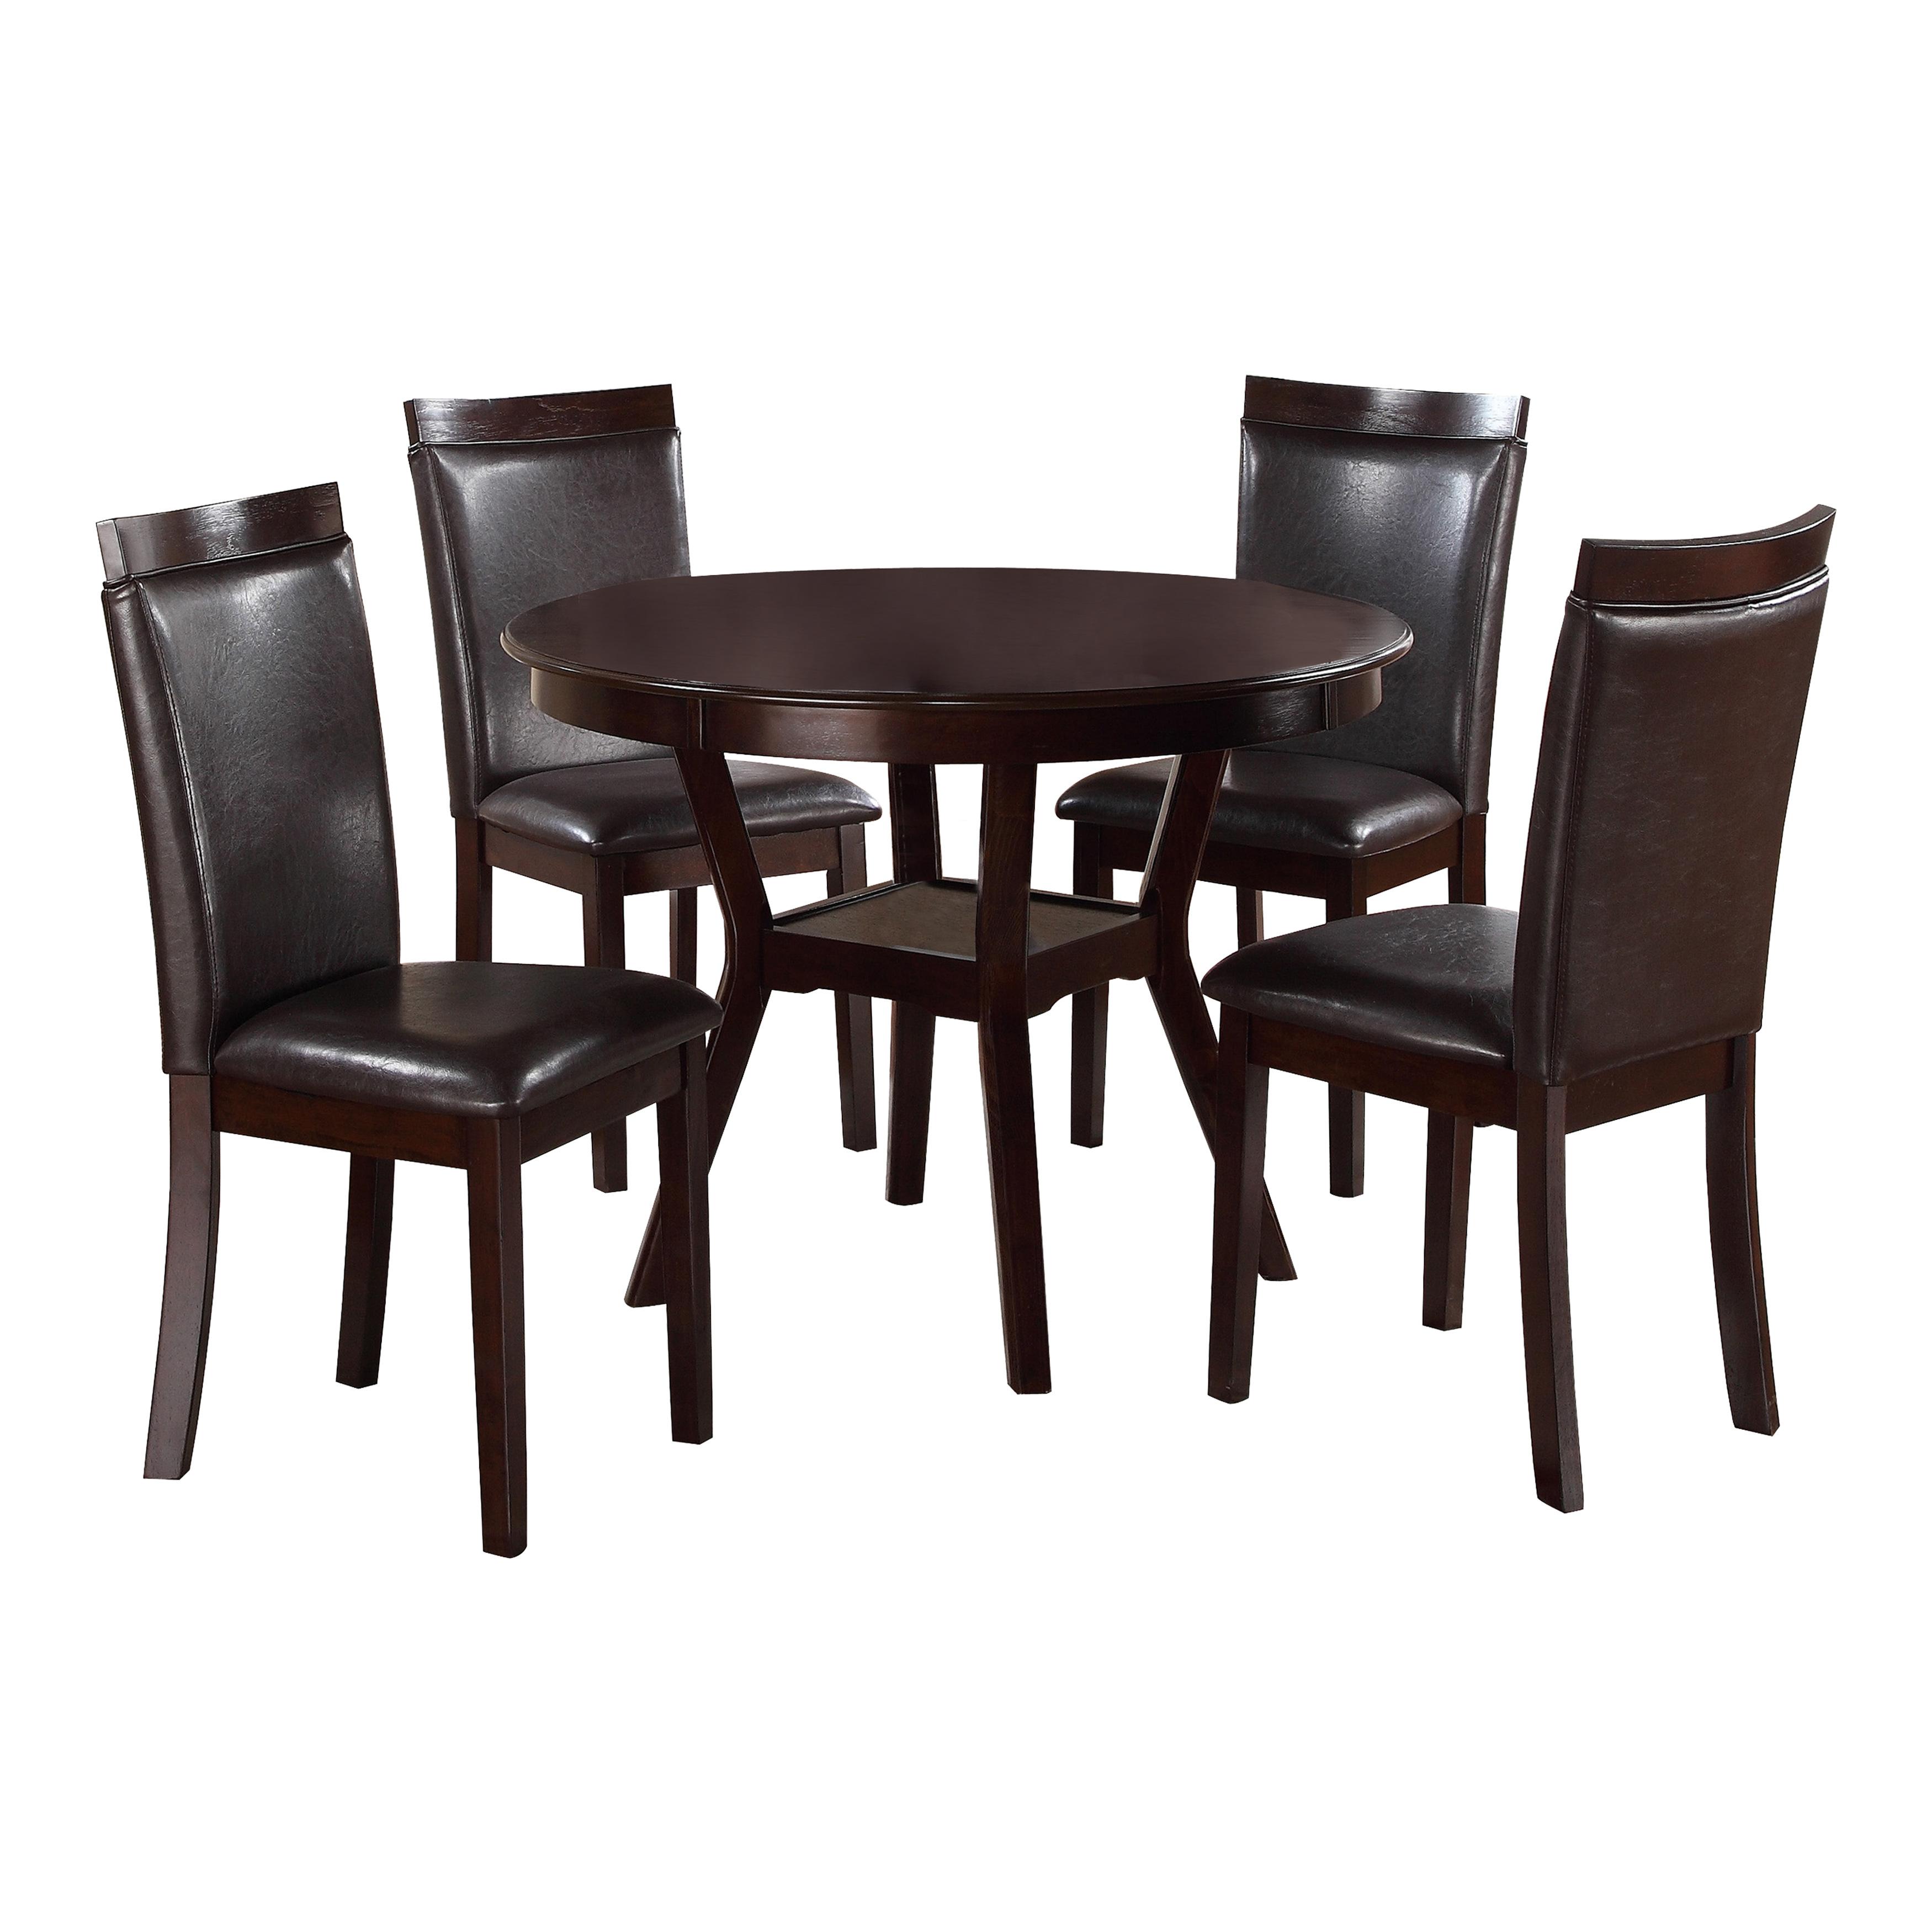 Contemporary Dining Room Set 5104 Shankmen 5104 in Espresso Faux Leather